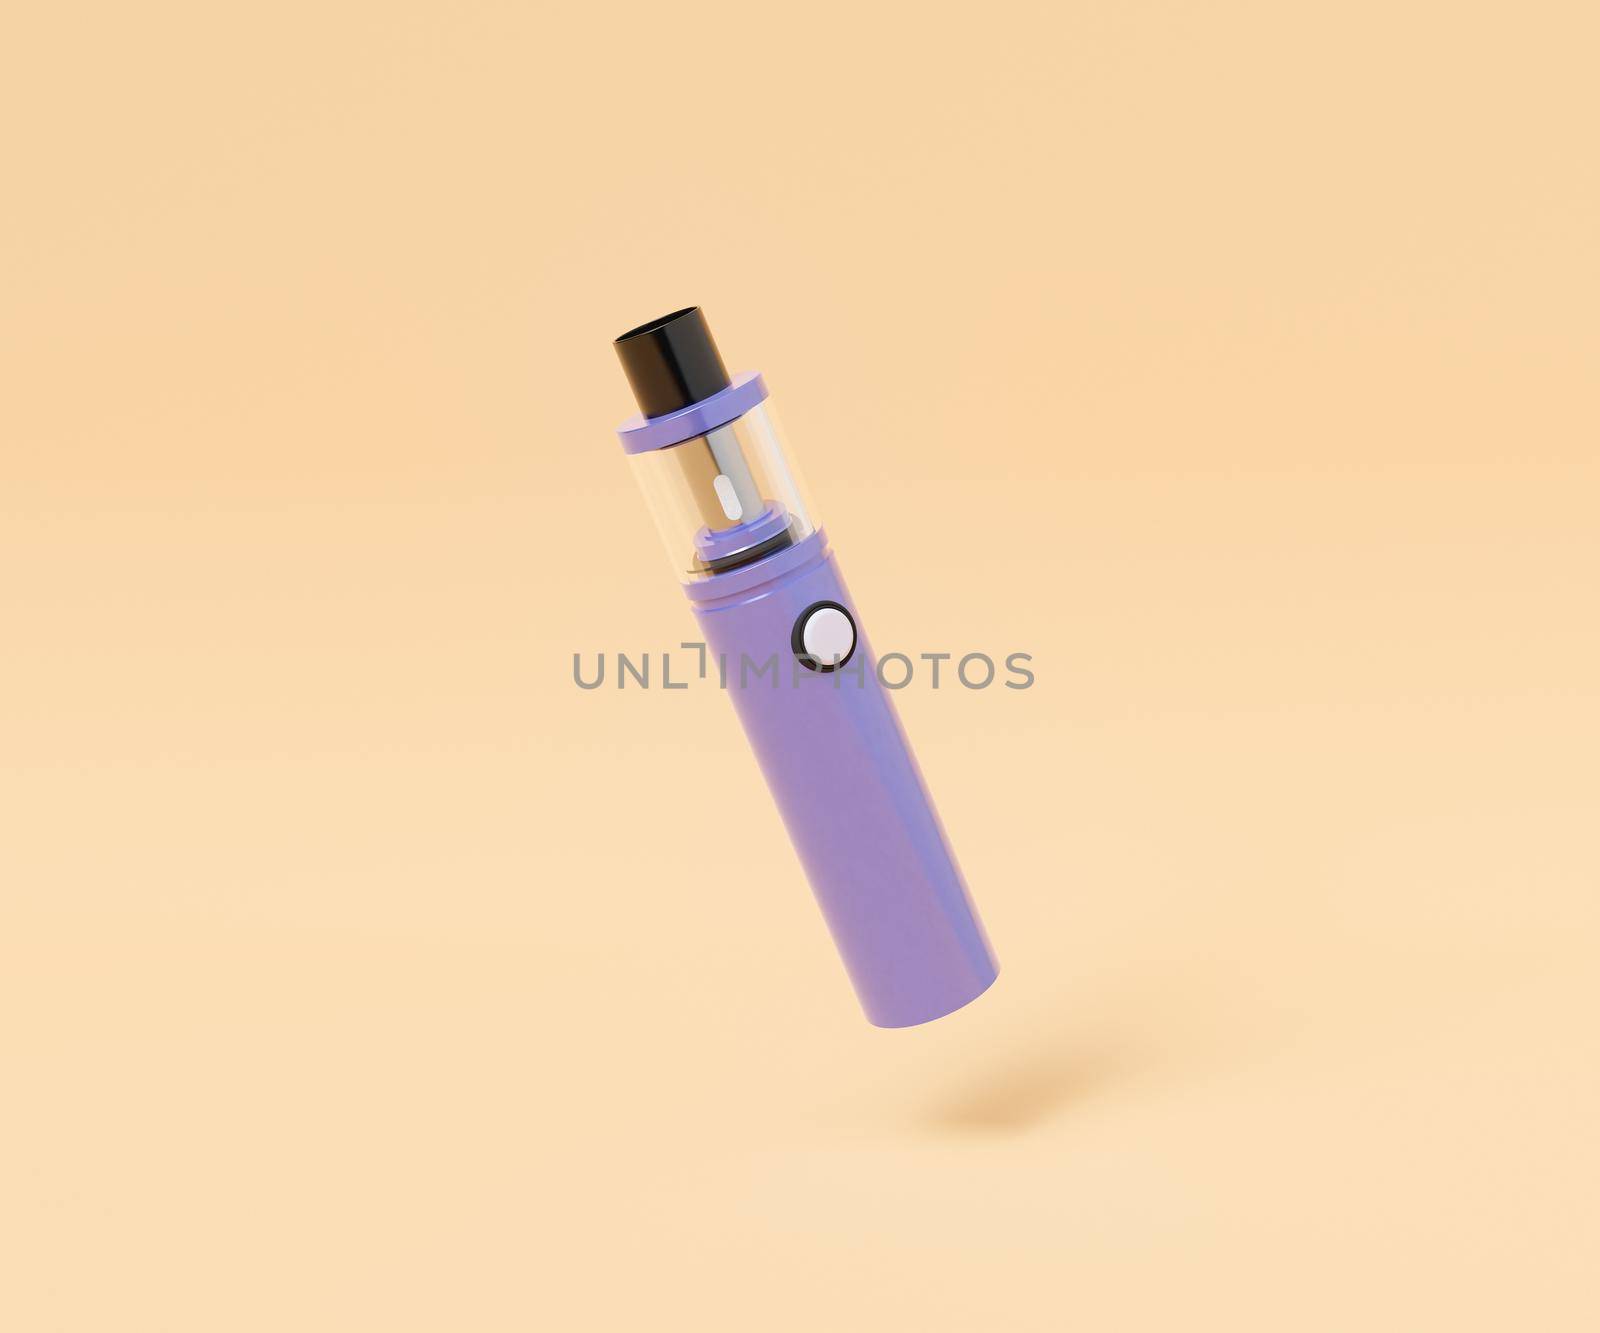 3D illustration of violet electronic cigarette with round button levitating against yellow background